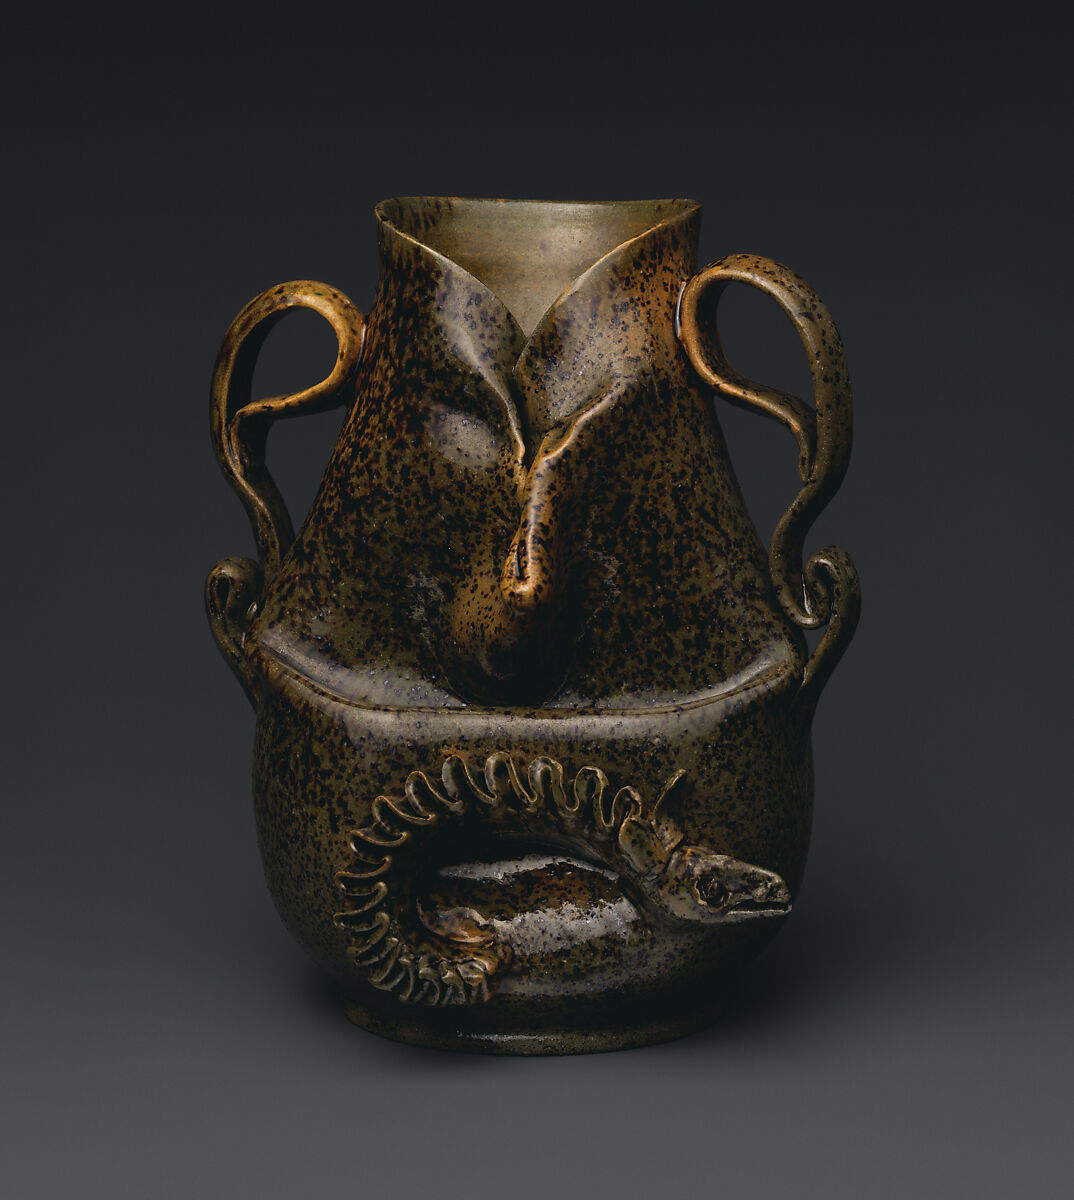 Pitcher, George E. Ohr, earthenware, American